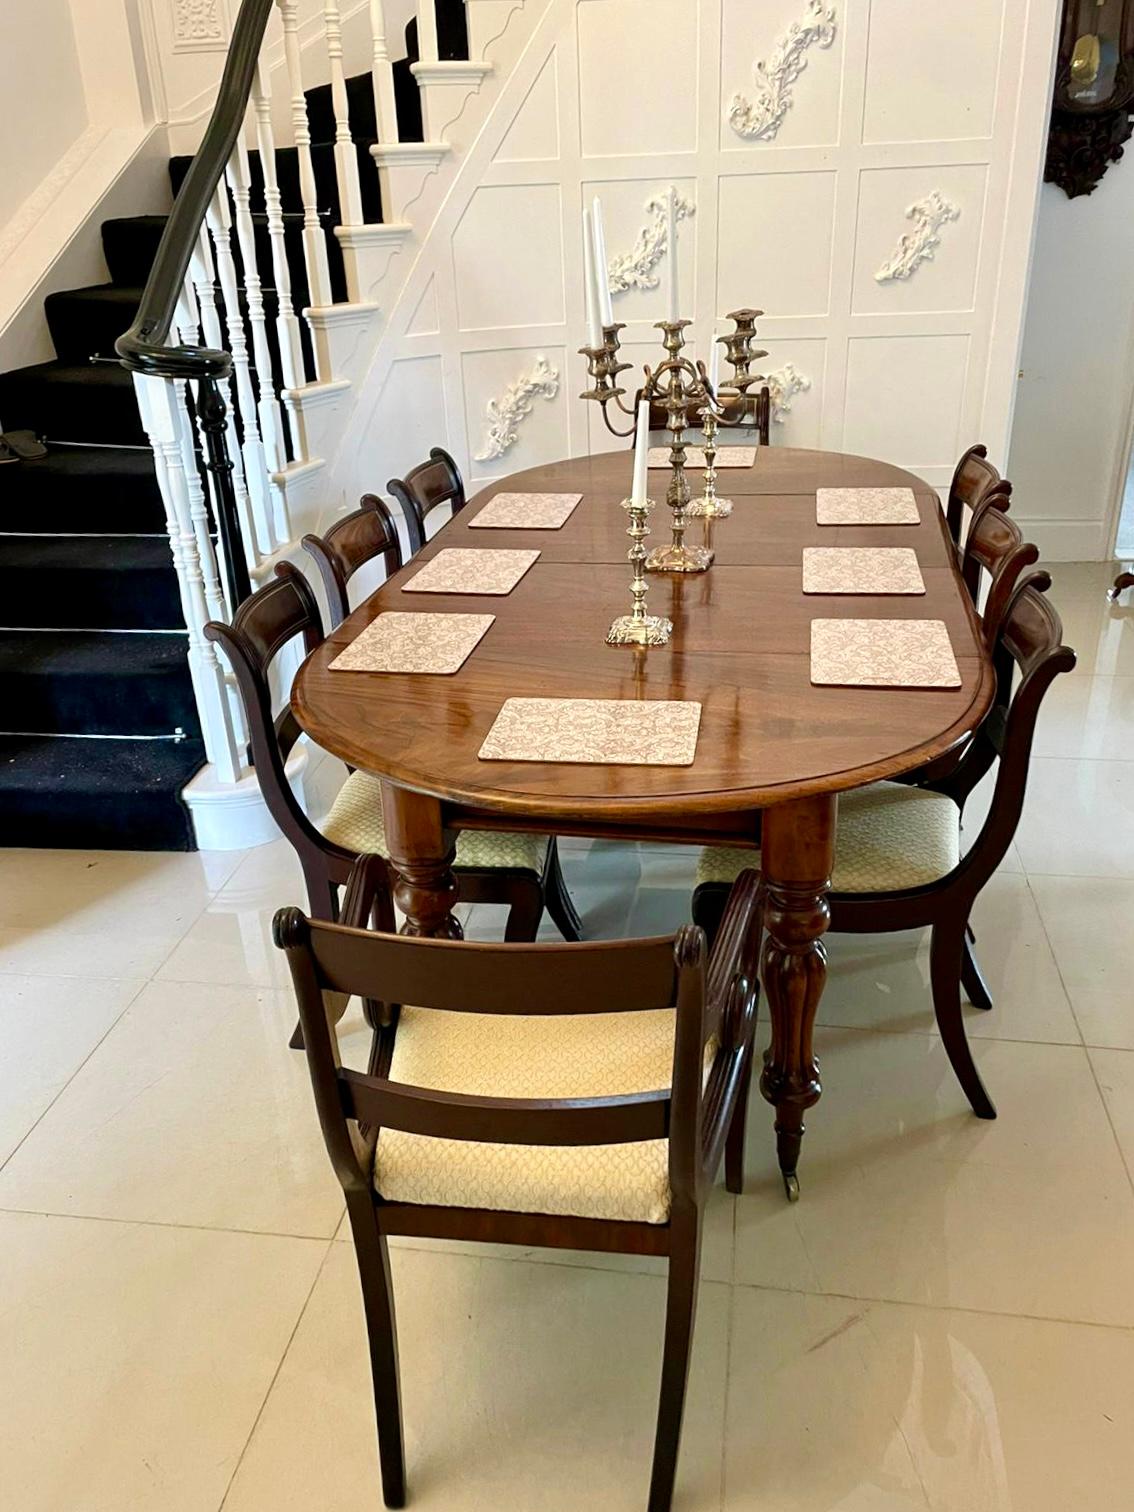 Quality William IV mahogany extending dining table having a quality mahogany top with a moulded edge, two large extra leaves standing on four elegantly shaped reeded legs with original castors. 

This handsome table also makes a round